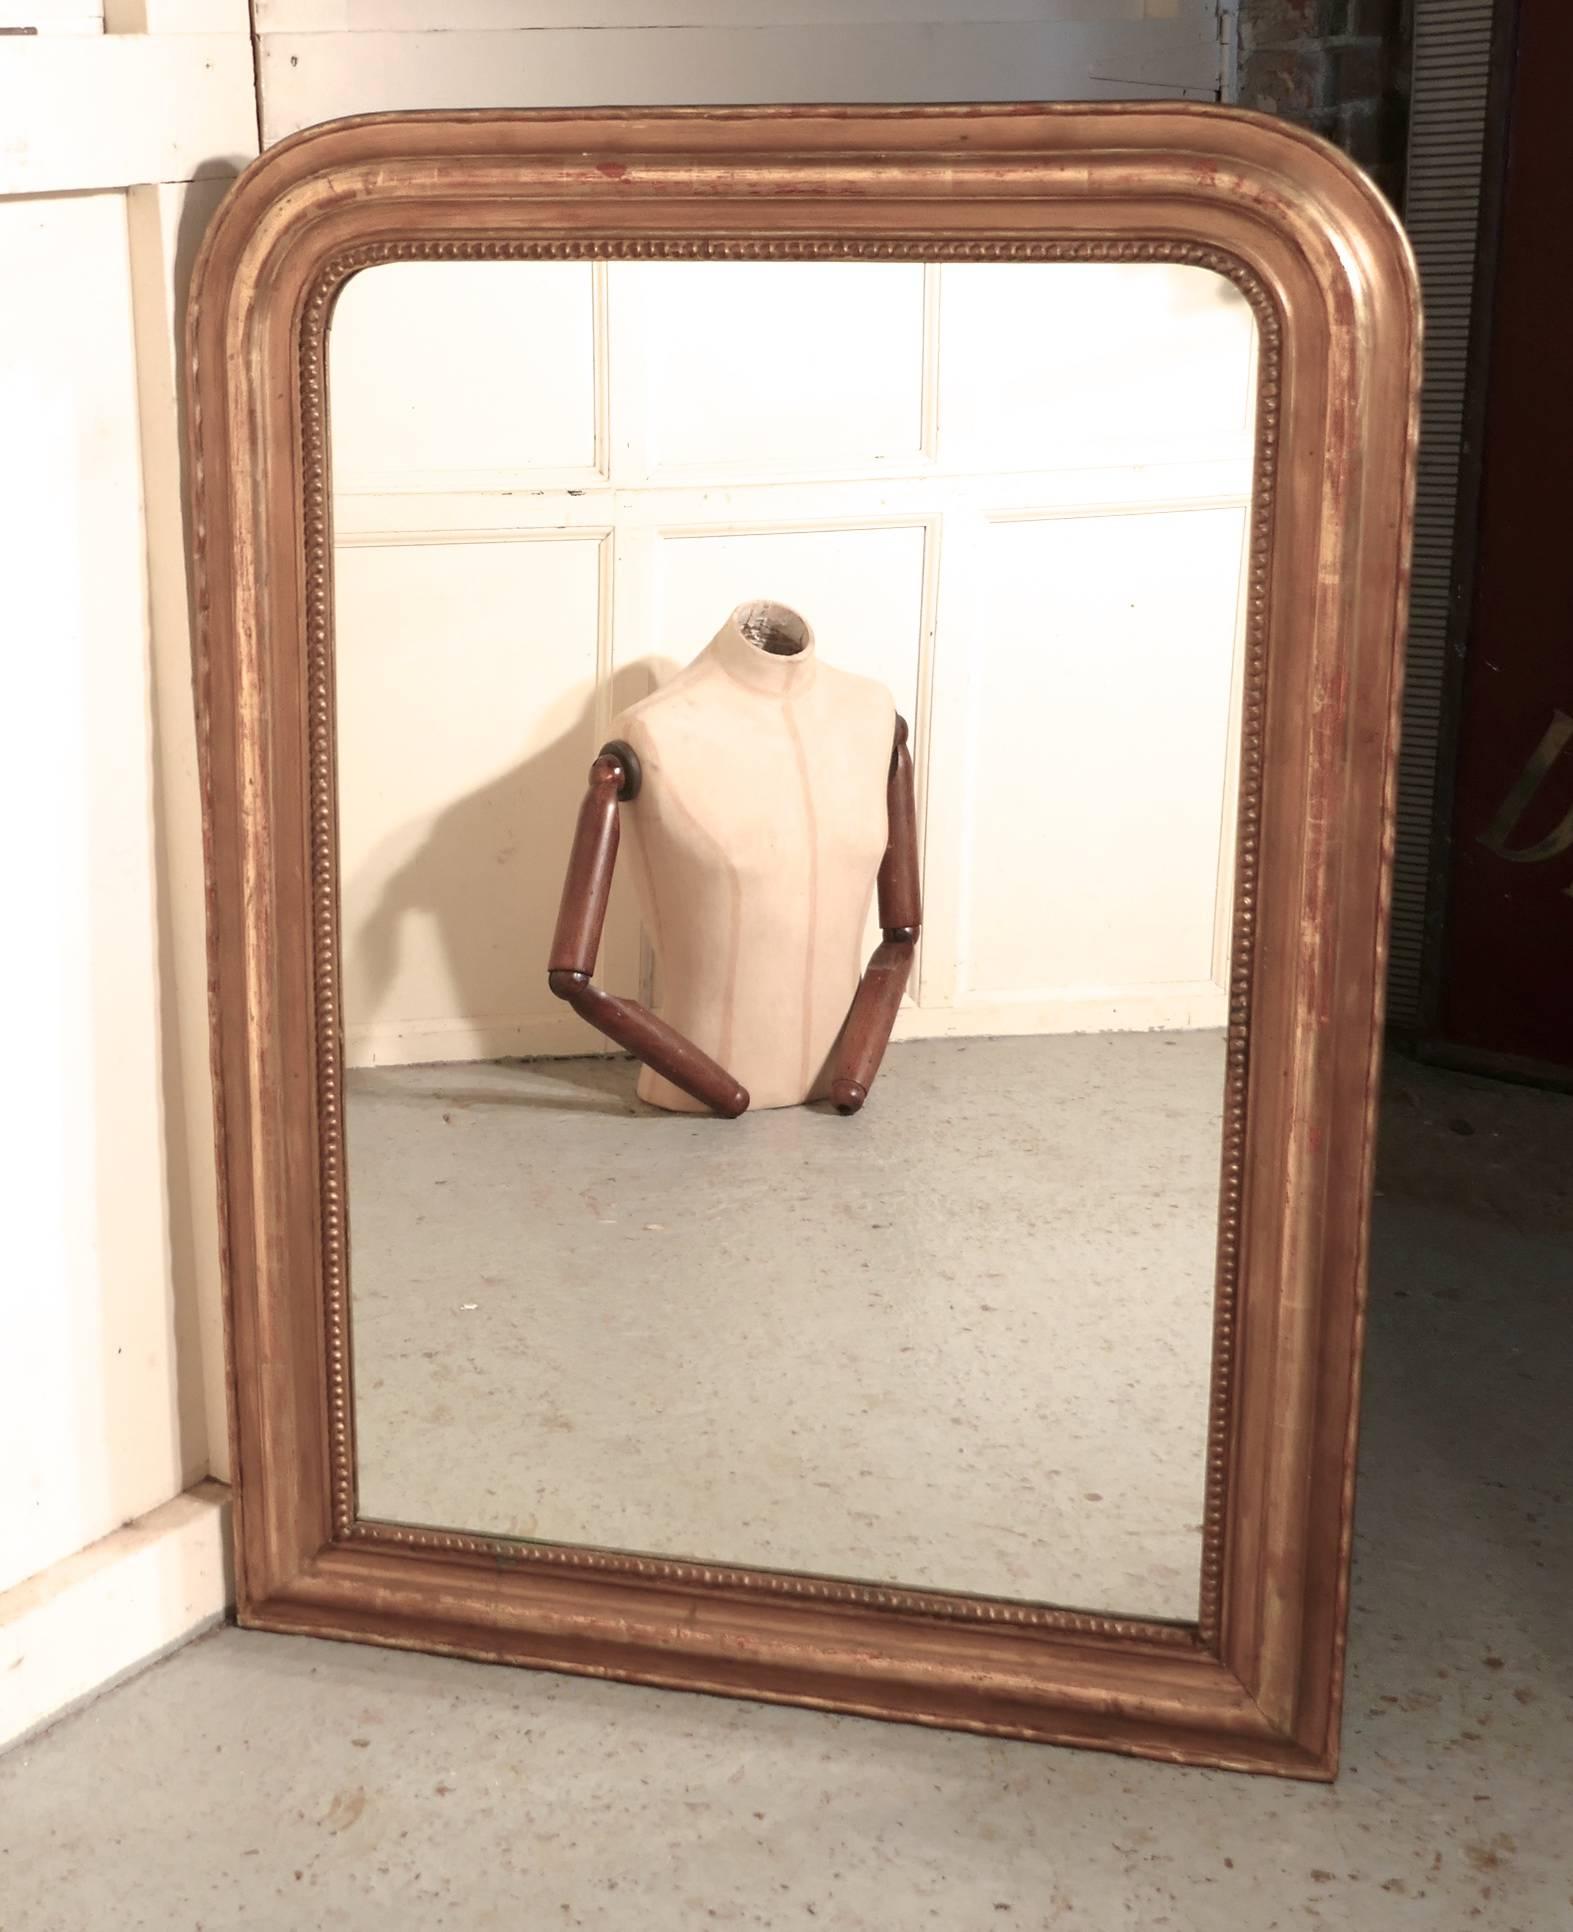 French, 19th century Louis Philippe gold mirror

This is a charming Wall Mirror a genuine example of French chic furnishing, the 4” mirror frame has had a few knocks over the years so it has been given a re polish to brighten it up while still